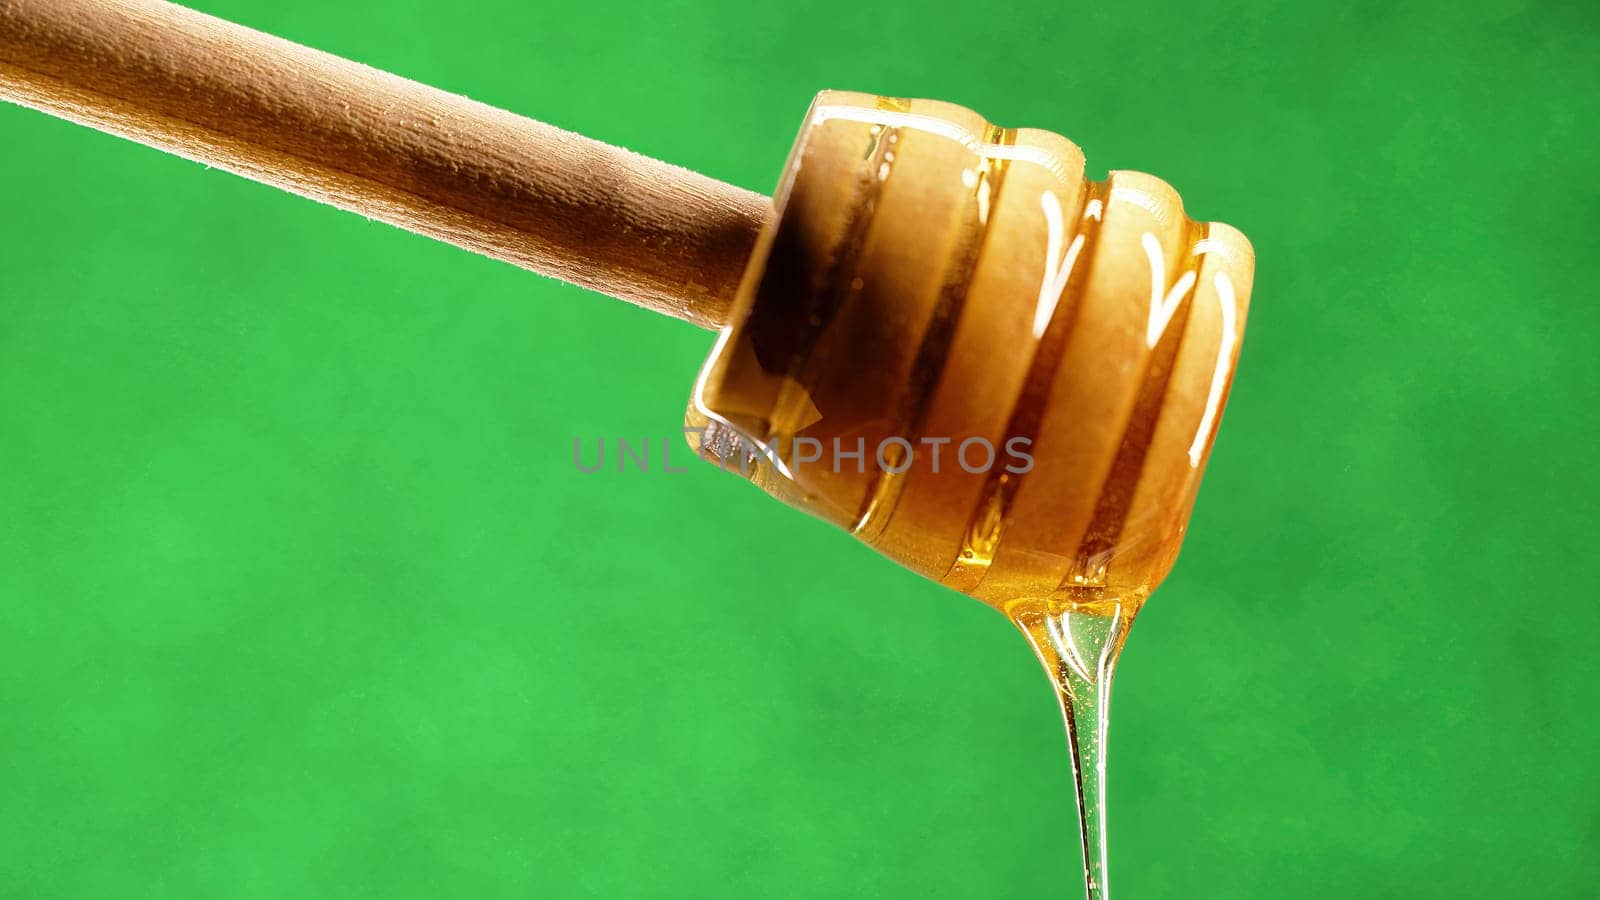 Organic honey flows from olive wood dipper stick spoon, tasty process. Apiary, beekeeping concept. Dripping, pouring sweet fluid nectar in slow motion. High quality